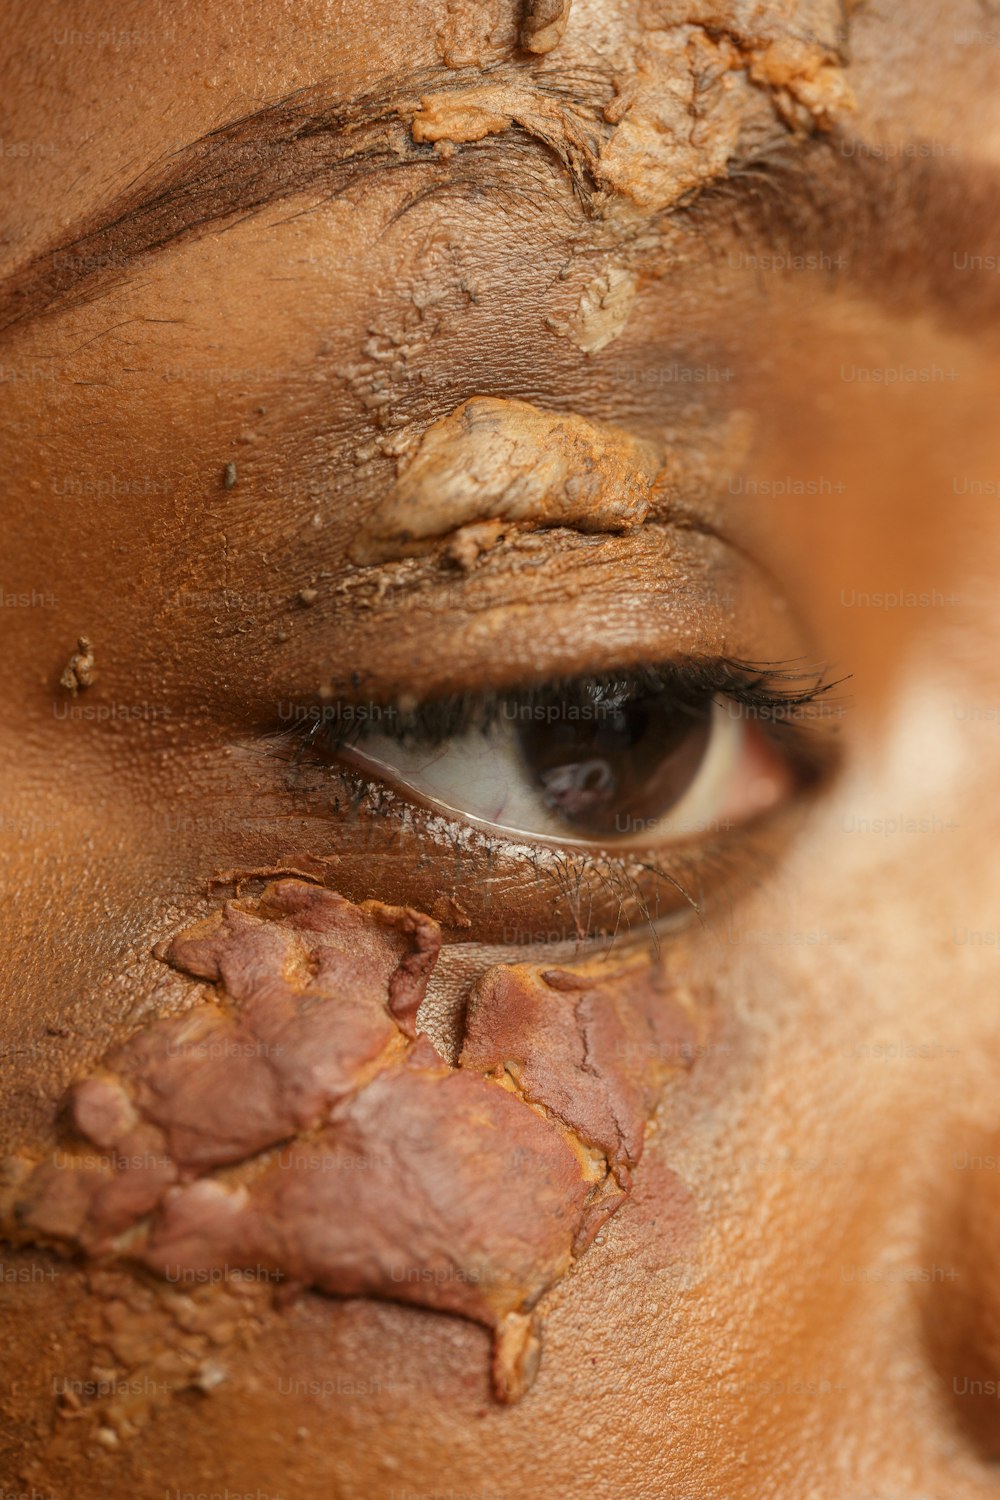 a close up of a woman's face with mud all over her face